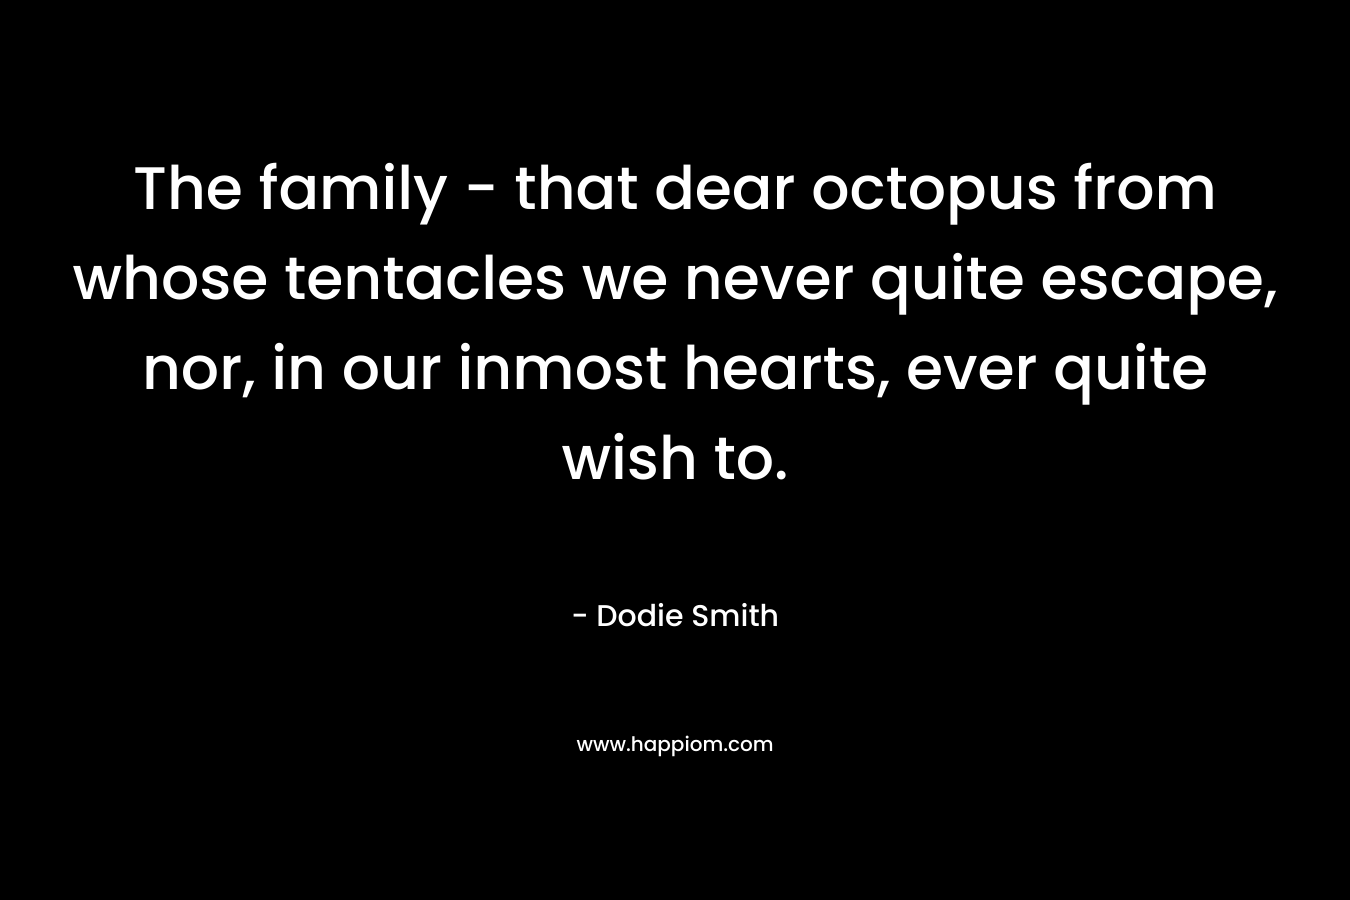 The family – that dear octopus from whose tentacles we never quite escape, nor, in our inmost hearts, ever quite wish to. – Dodie Smith